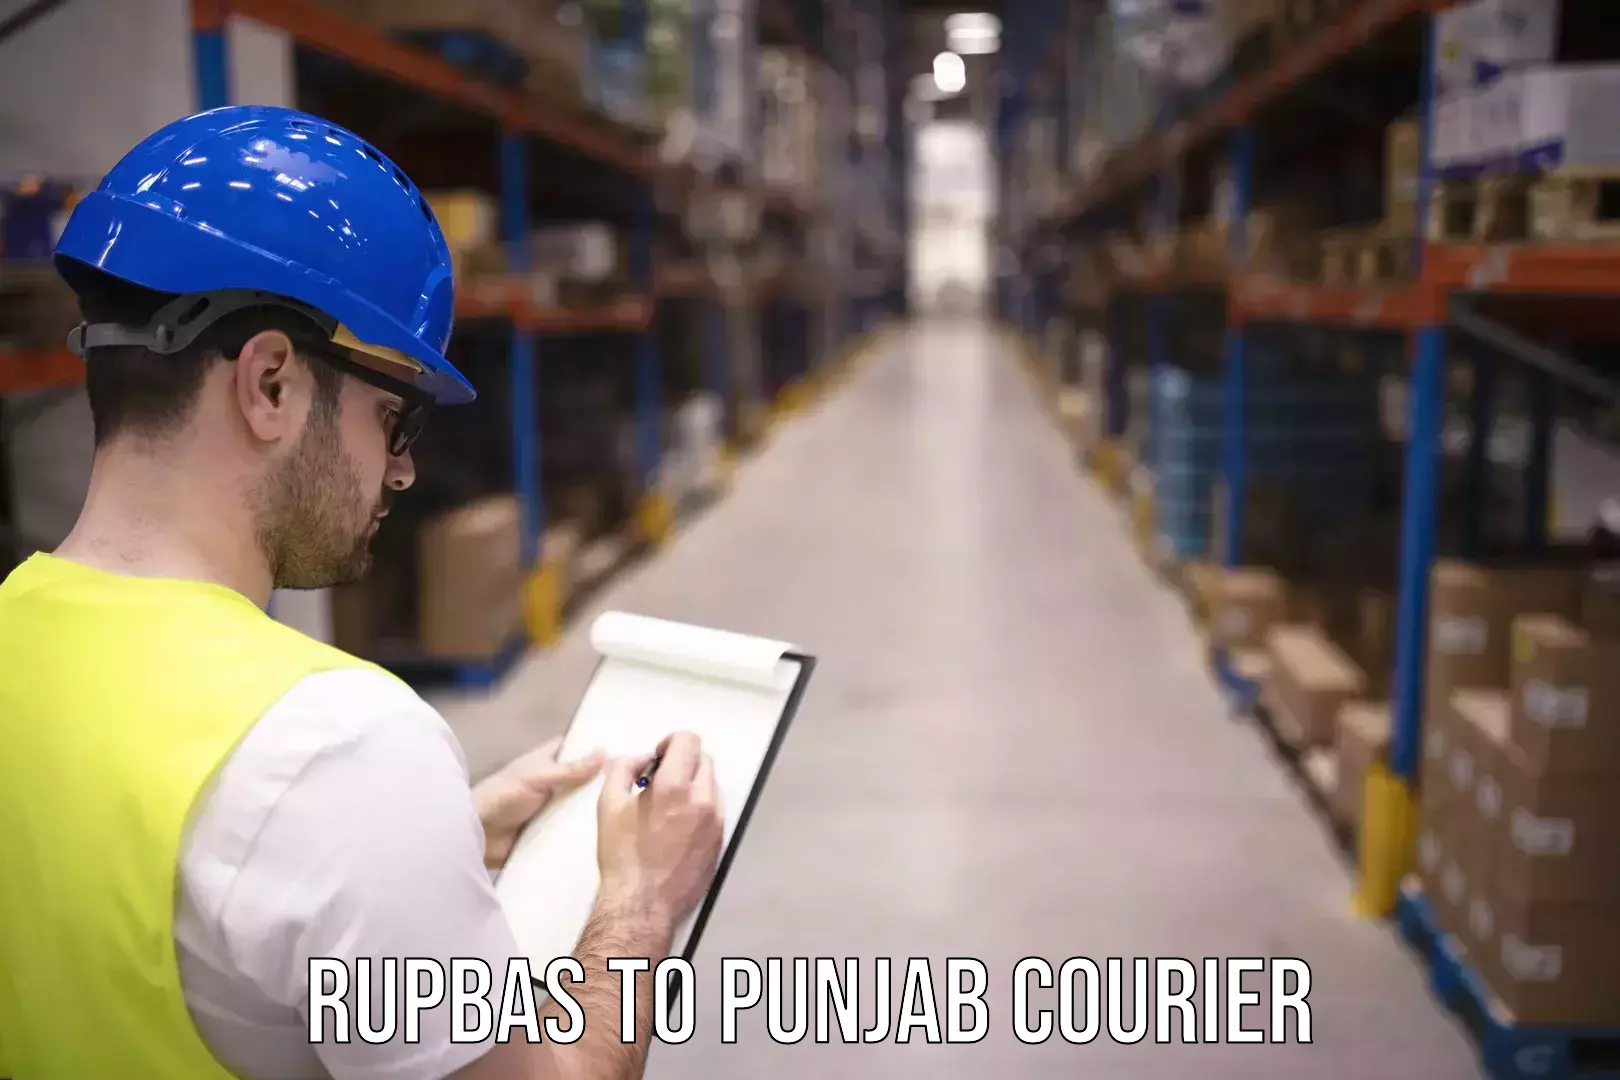 End-to-end delivery in Rupbas to Punjab